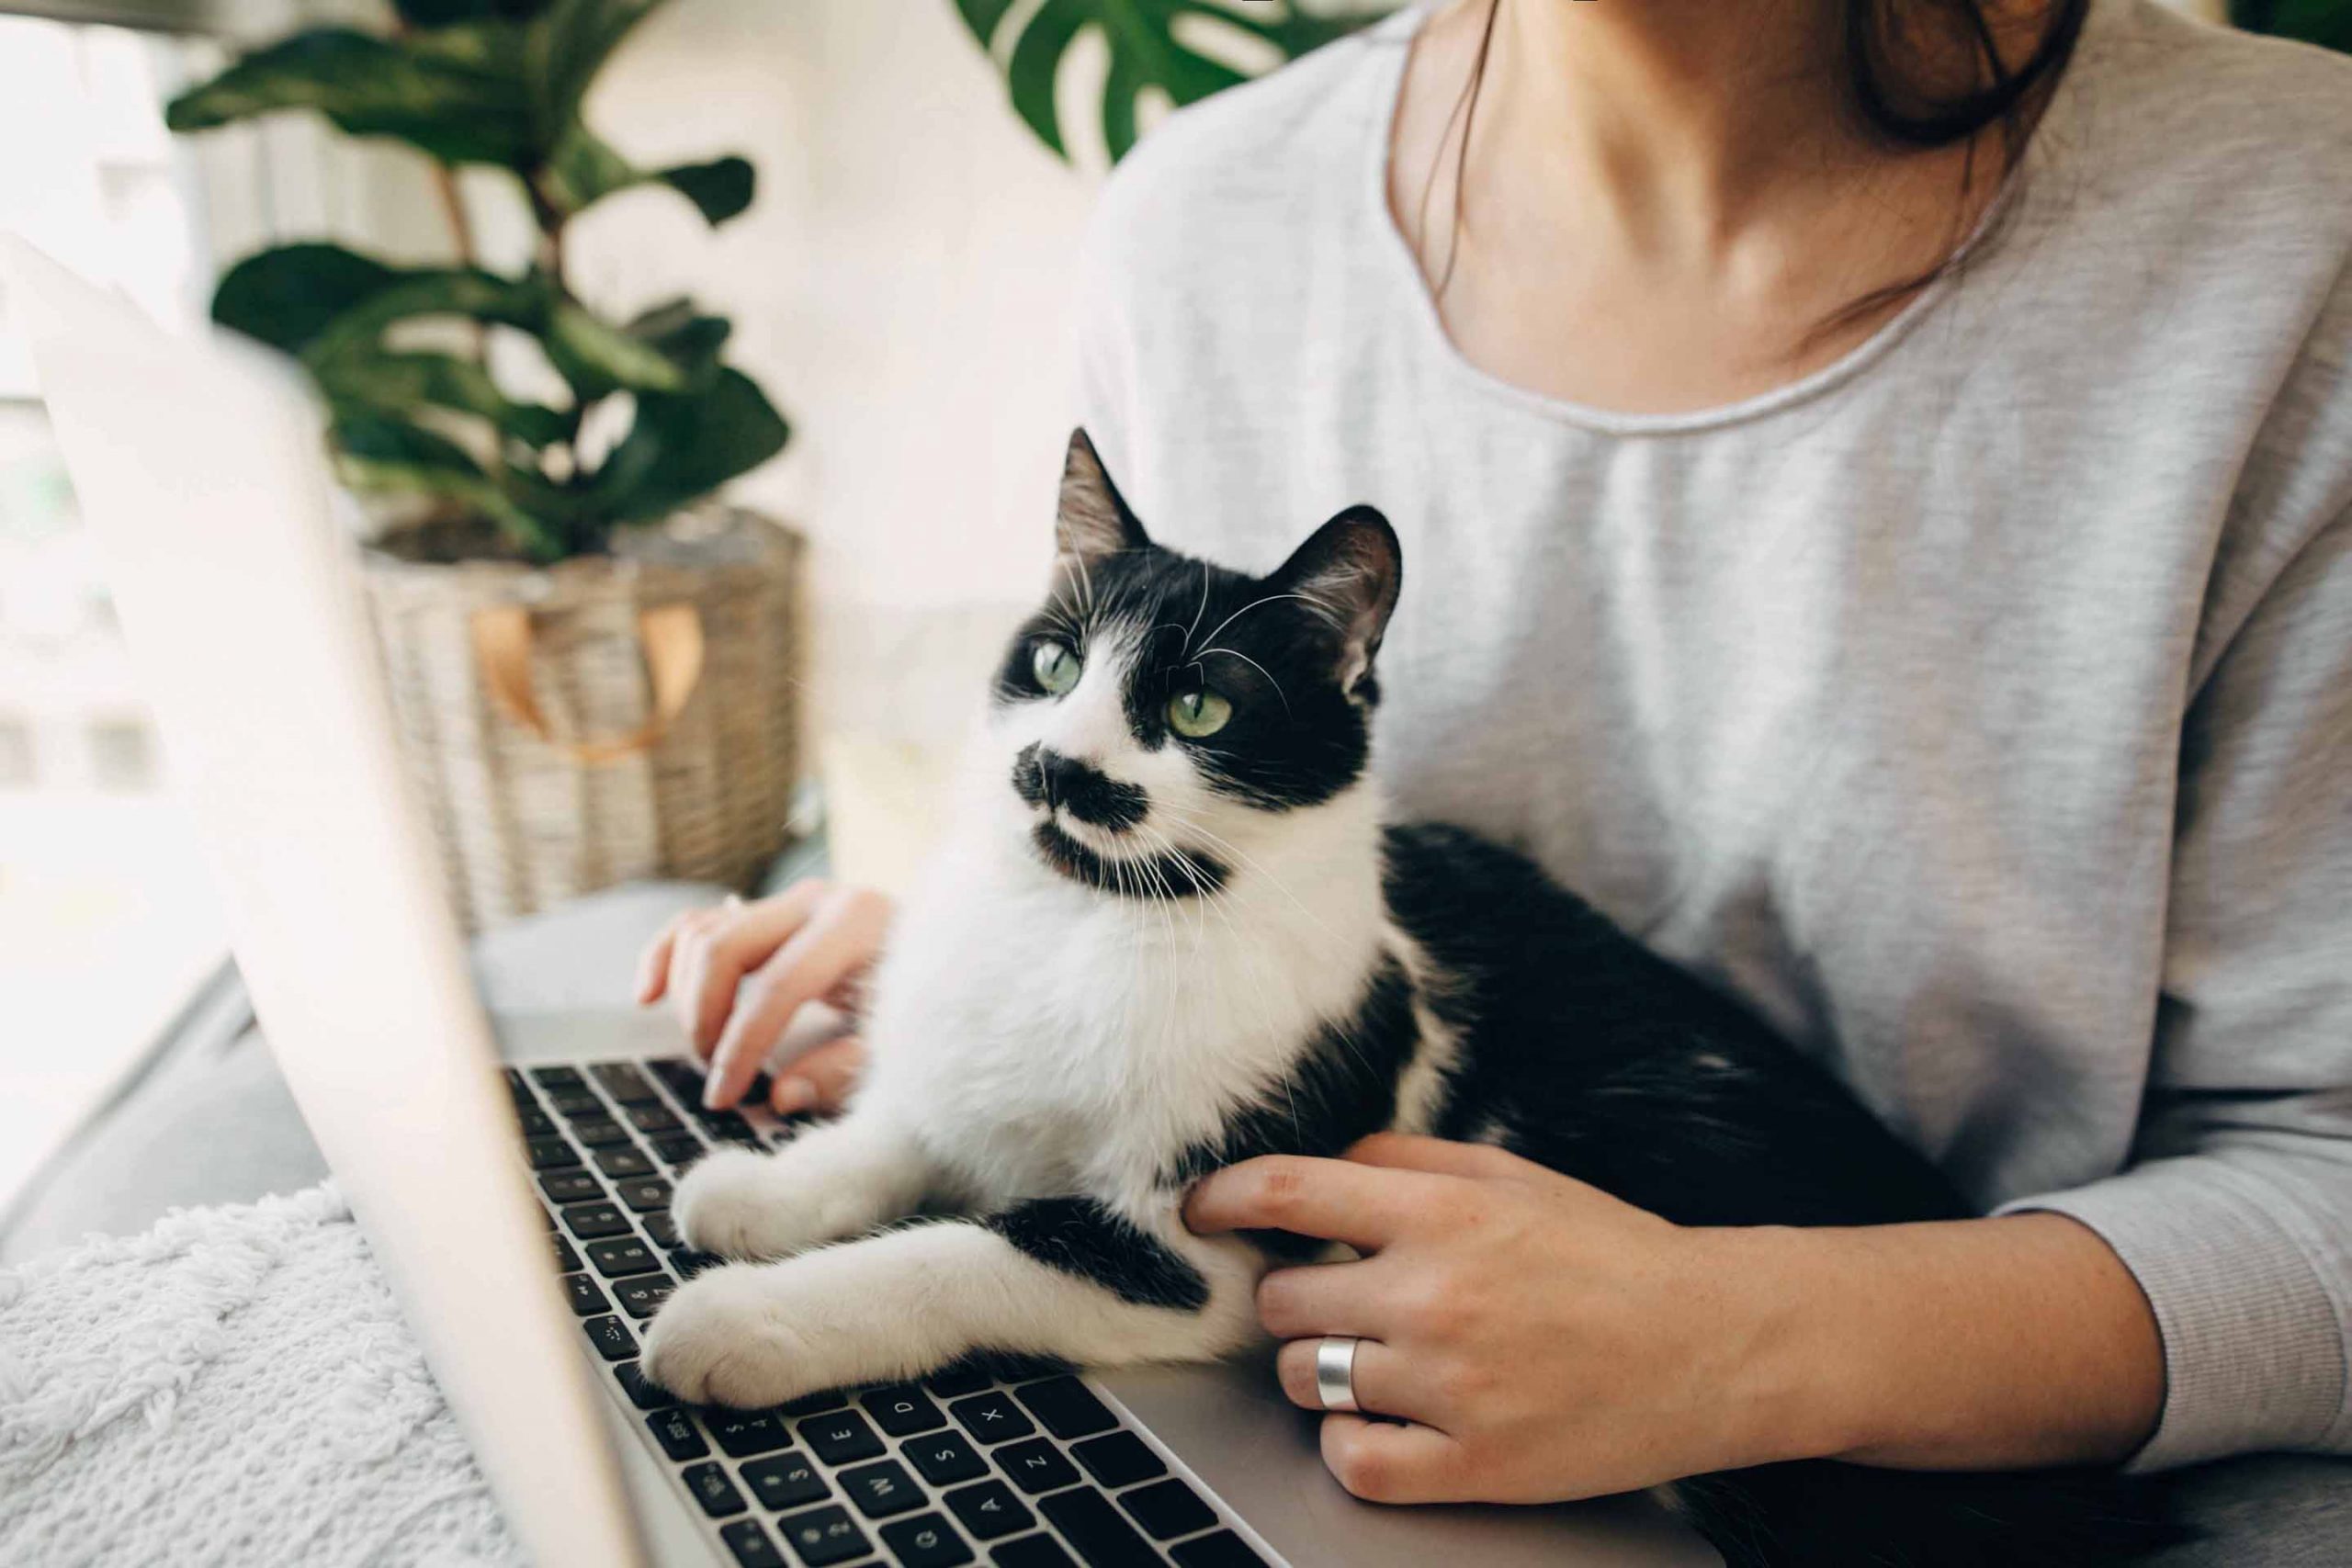 cat sitting on laptop keyboard while woman works